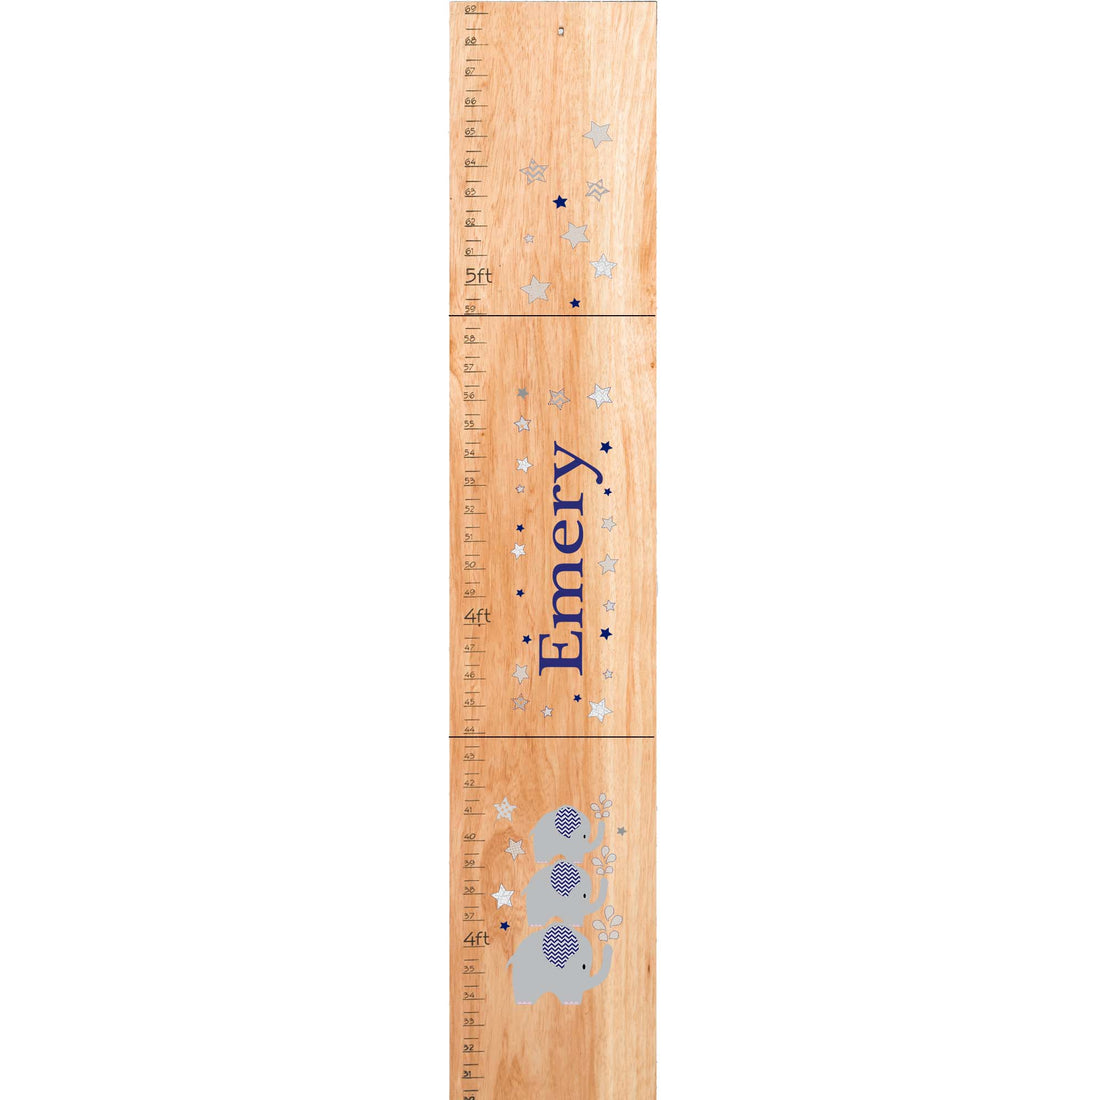 Personalized Natural Growth Chart With Elephant Navy Design